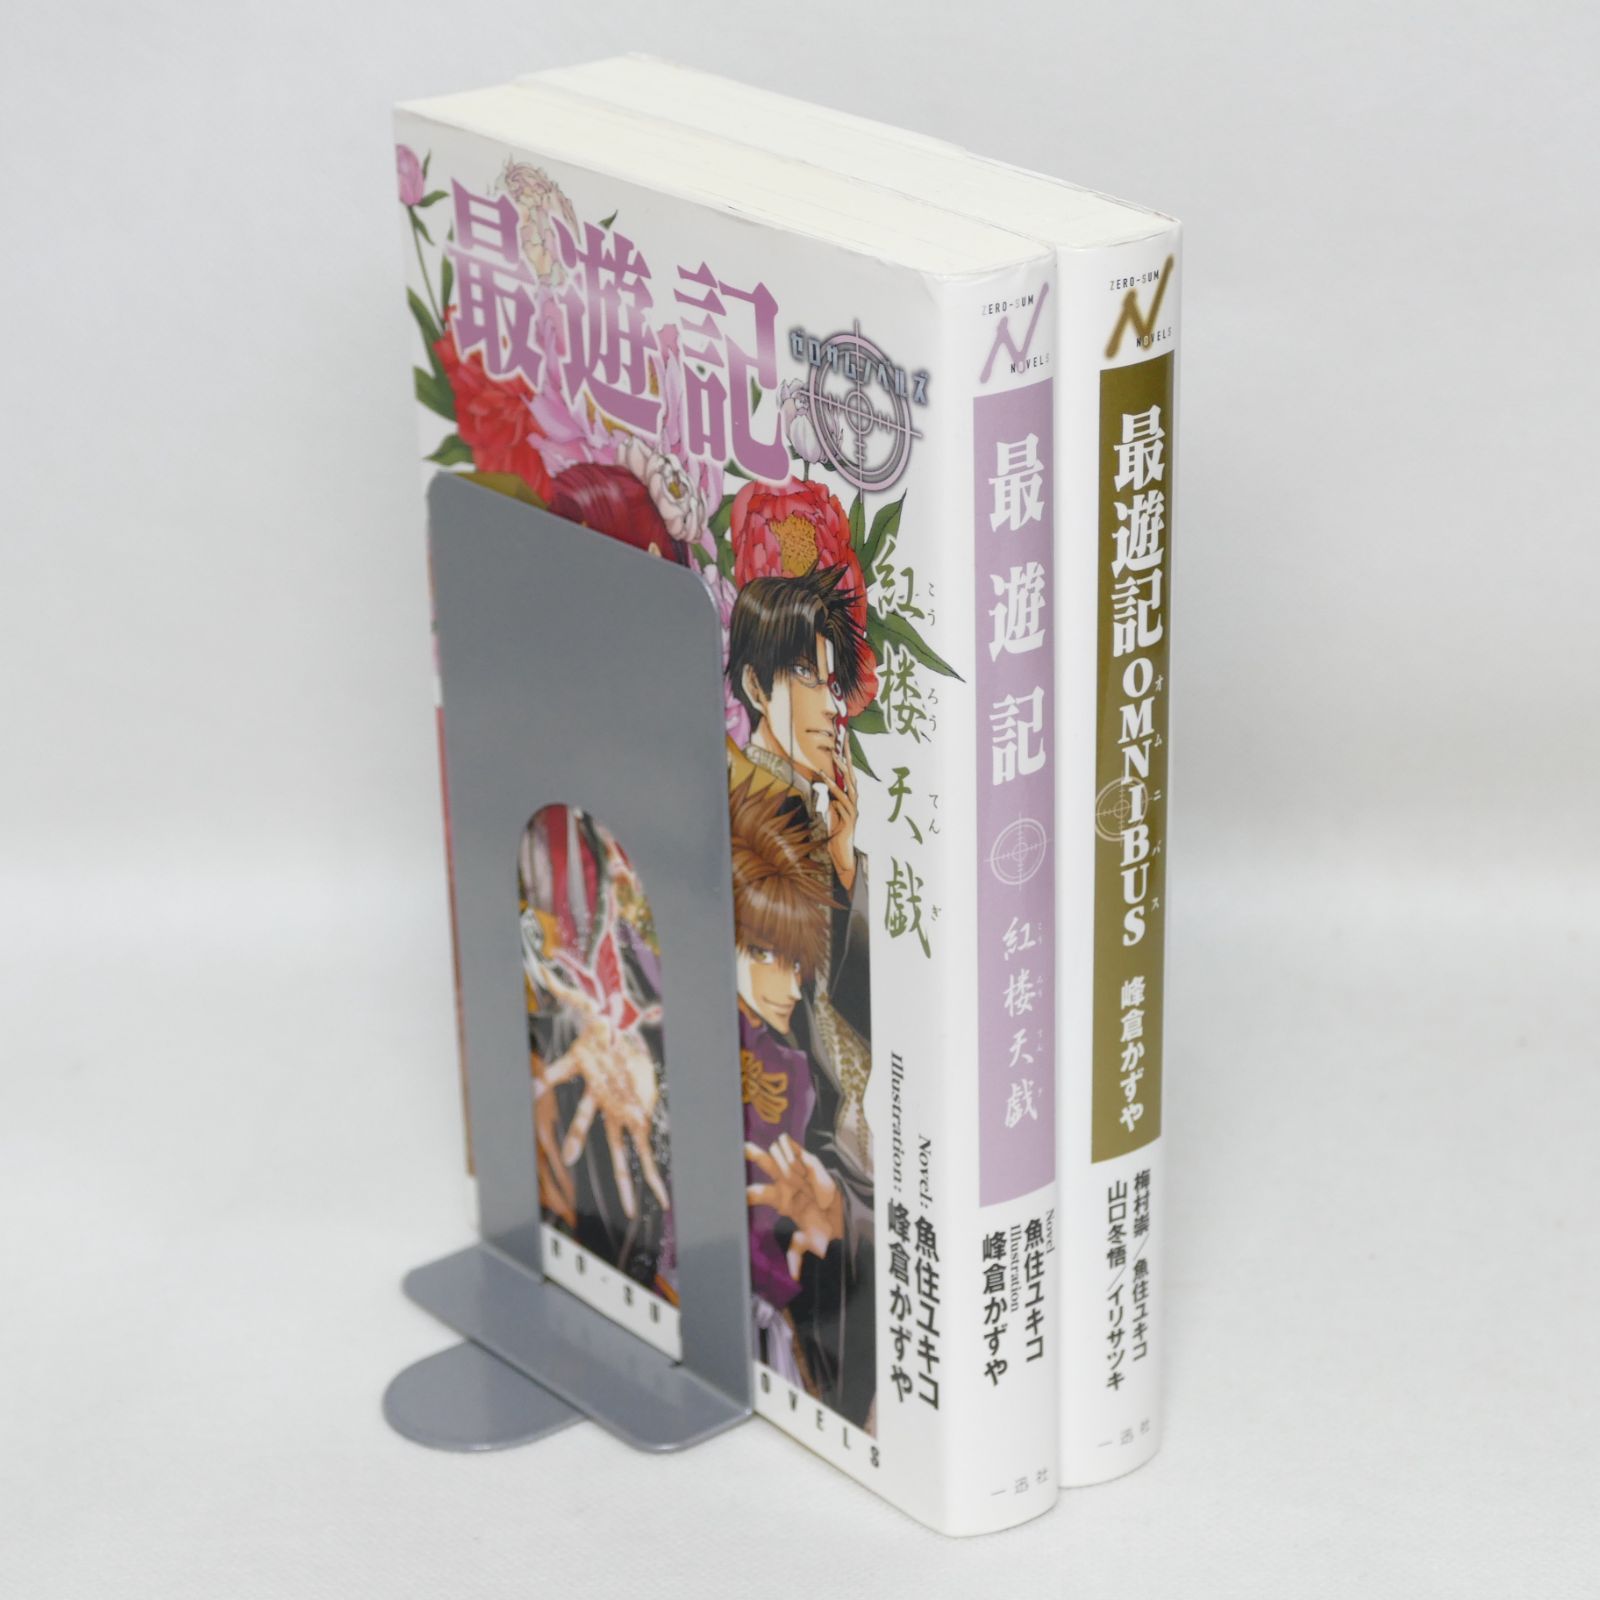 [Shops] 小説 最遊記 紅楼天戯・同 OMINUBUS　2冊セット